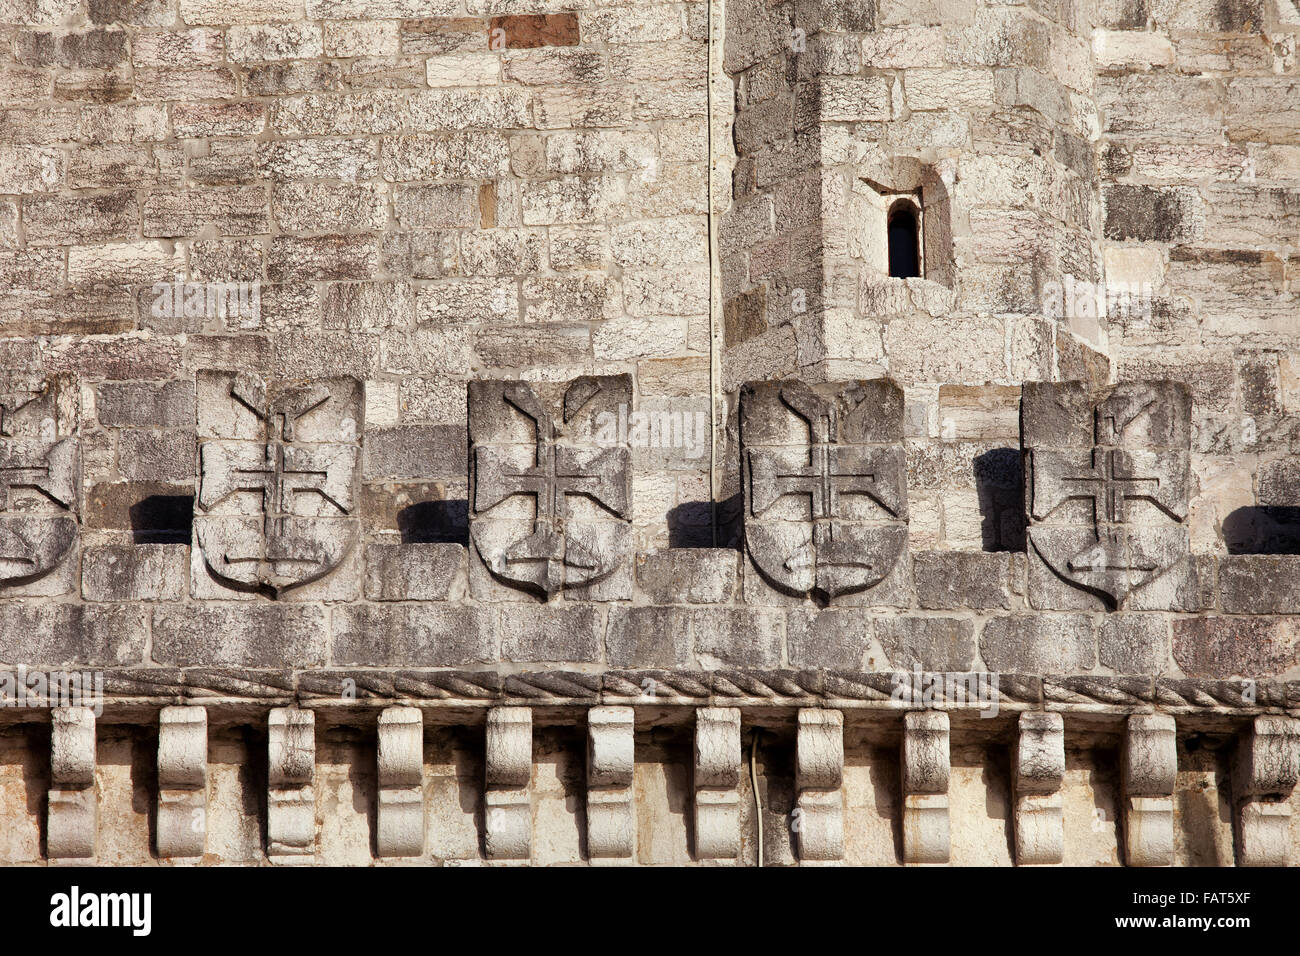 Portugal, Lisbon, Belem Tower battlement with crosses of the Order of Christ - former Order of Knights Templar Stock Photo